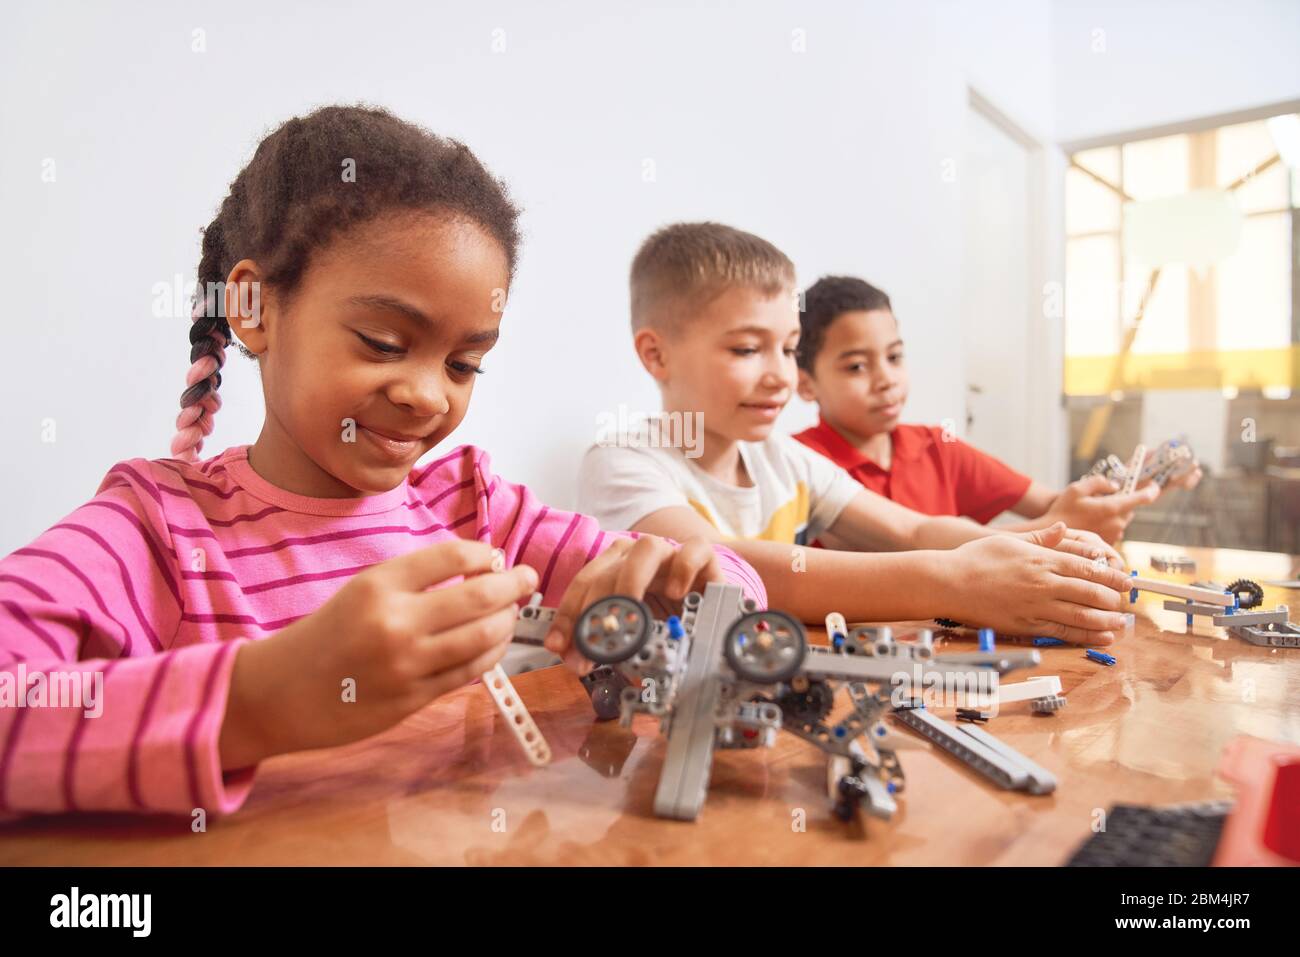 Building kit with colorful pieces for group of three multiracial kids creating toys, having positive emotions. Close up of smiling african girl working on project. Concept of science engineering. Stock Photo